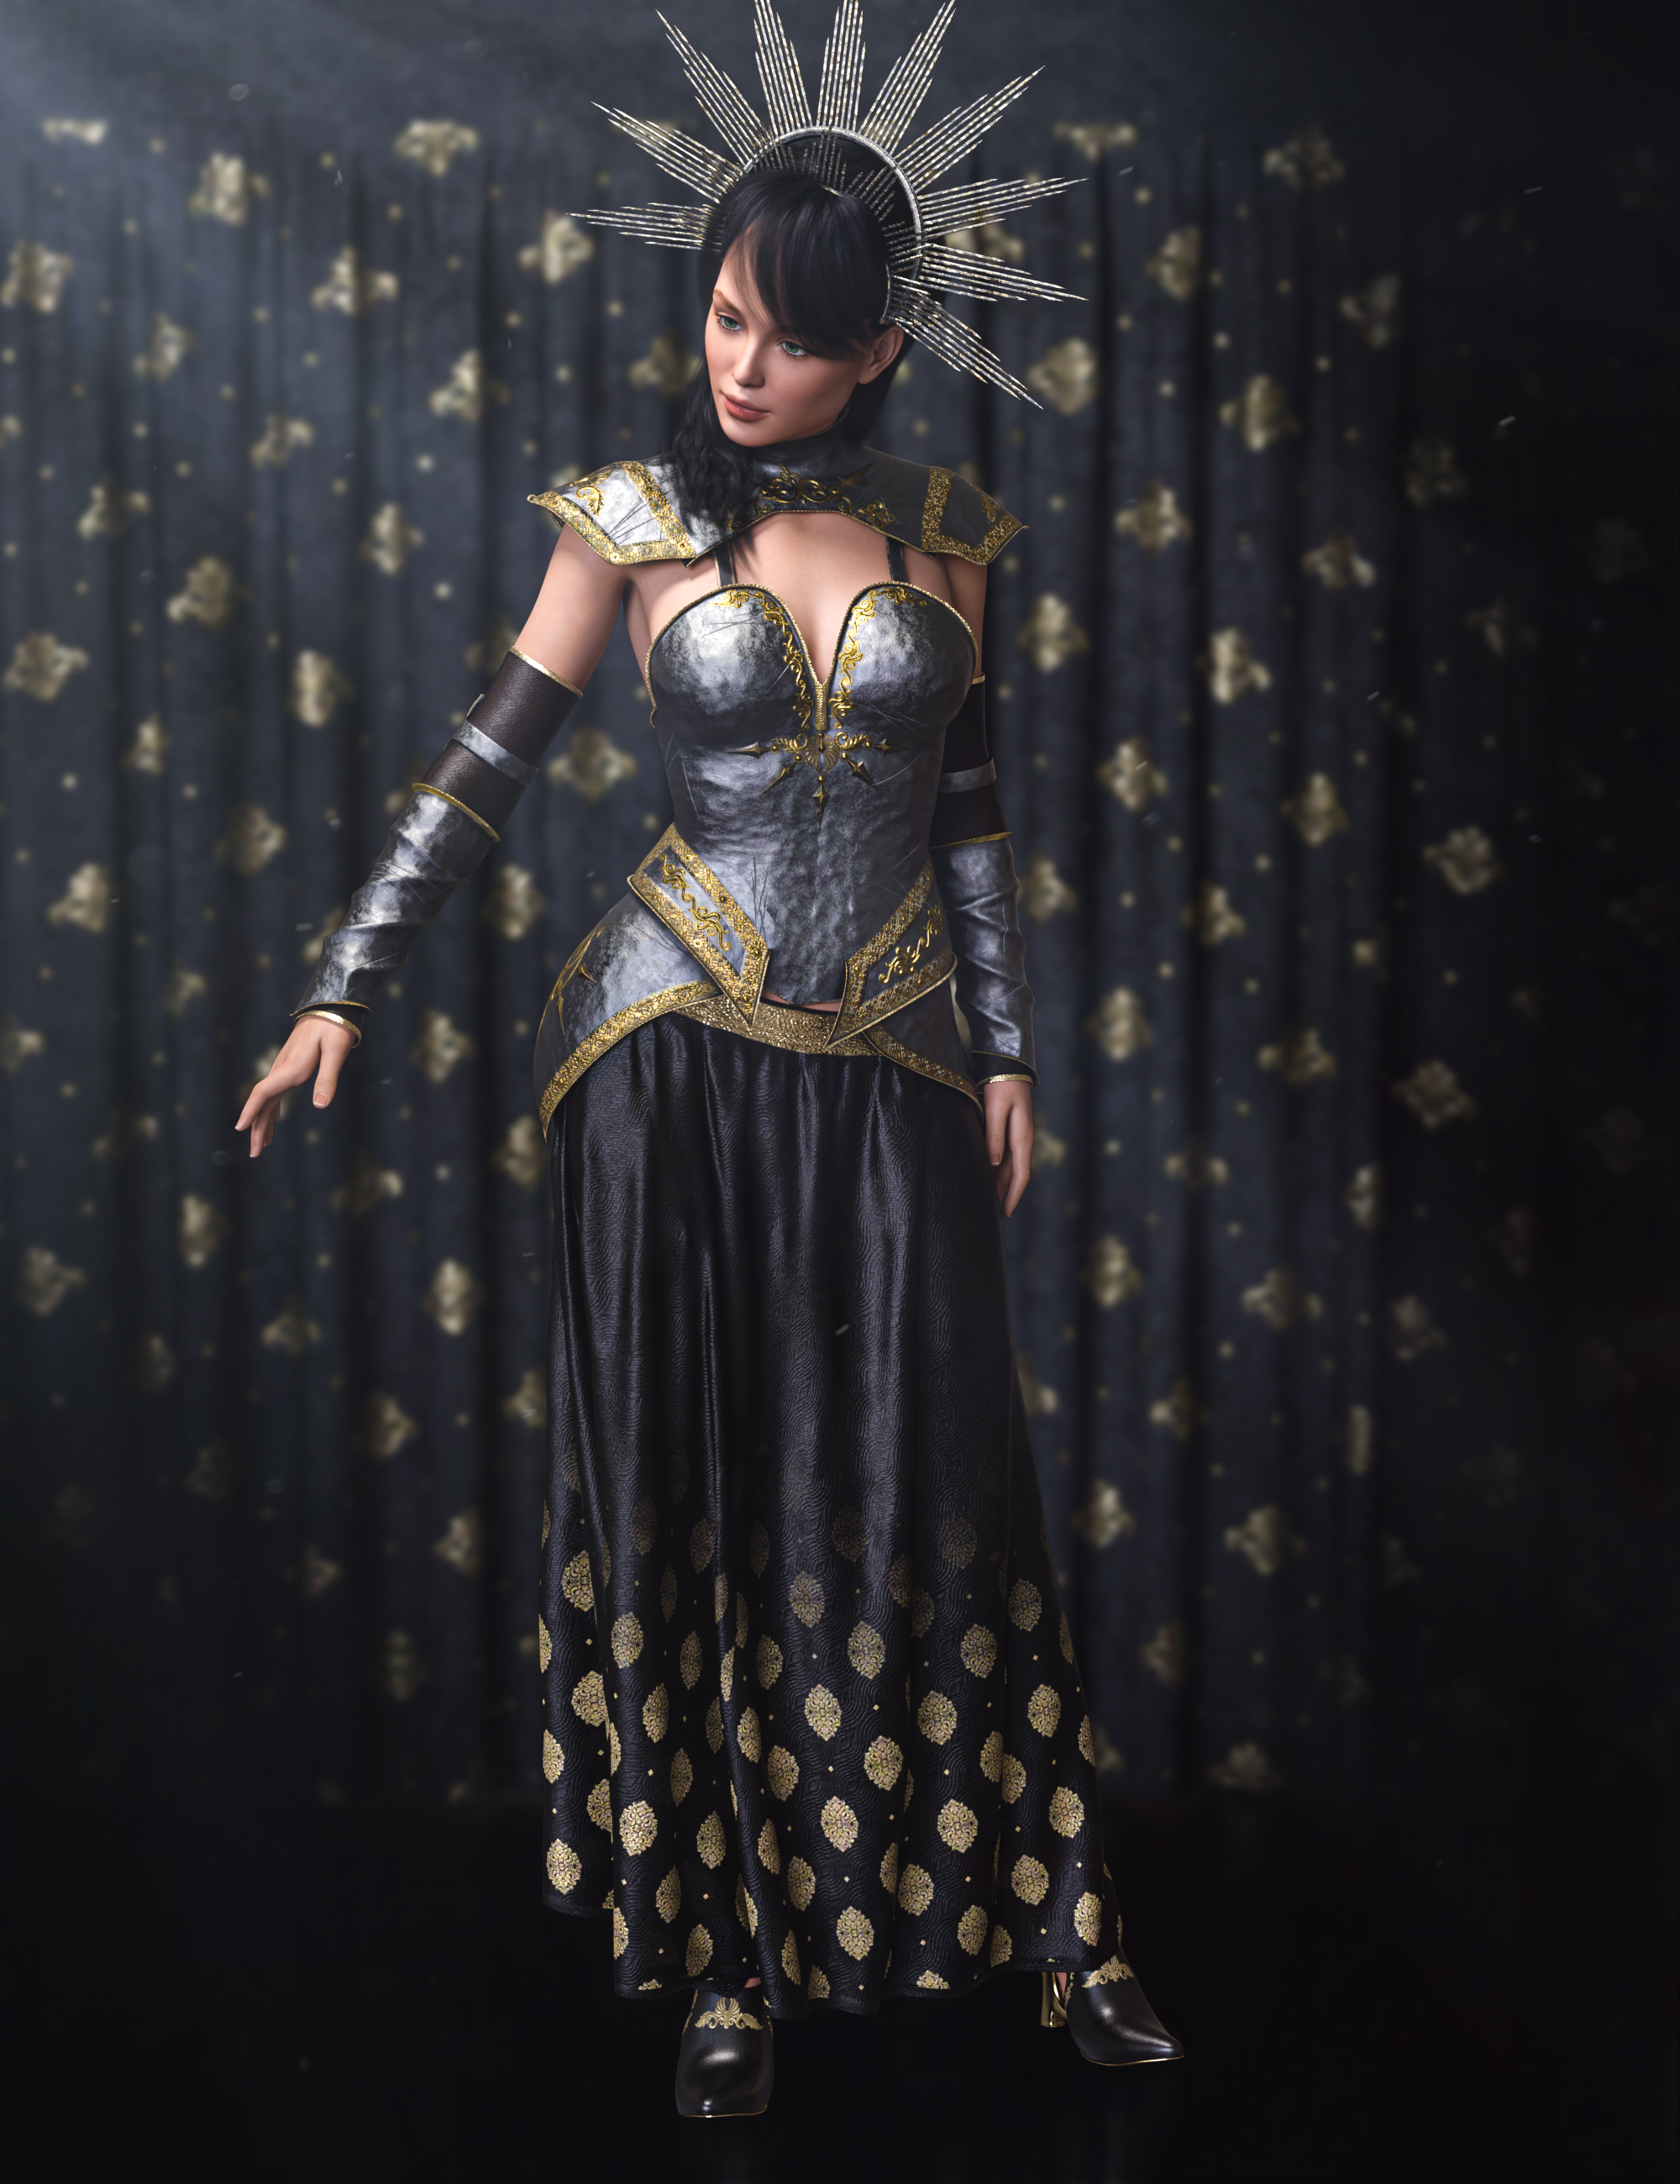 Elena Dark Queen Outfit dForce Skirt for Genesis 8 and 8.1 Females by: Beautyworks, 3D Models by Daz 3D